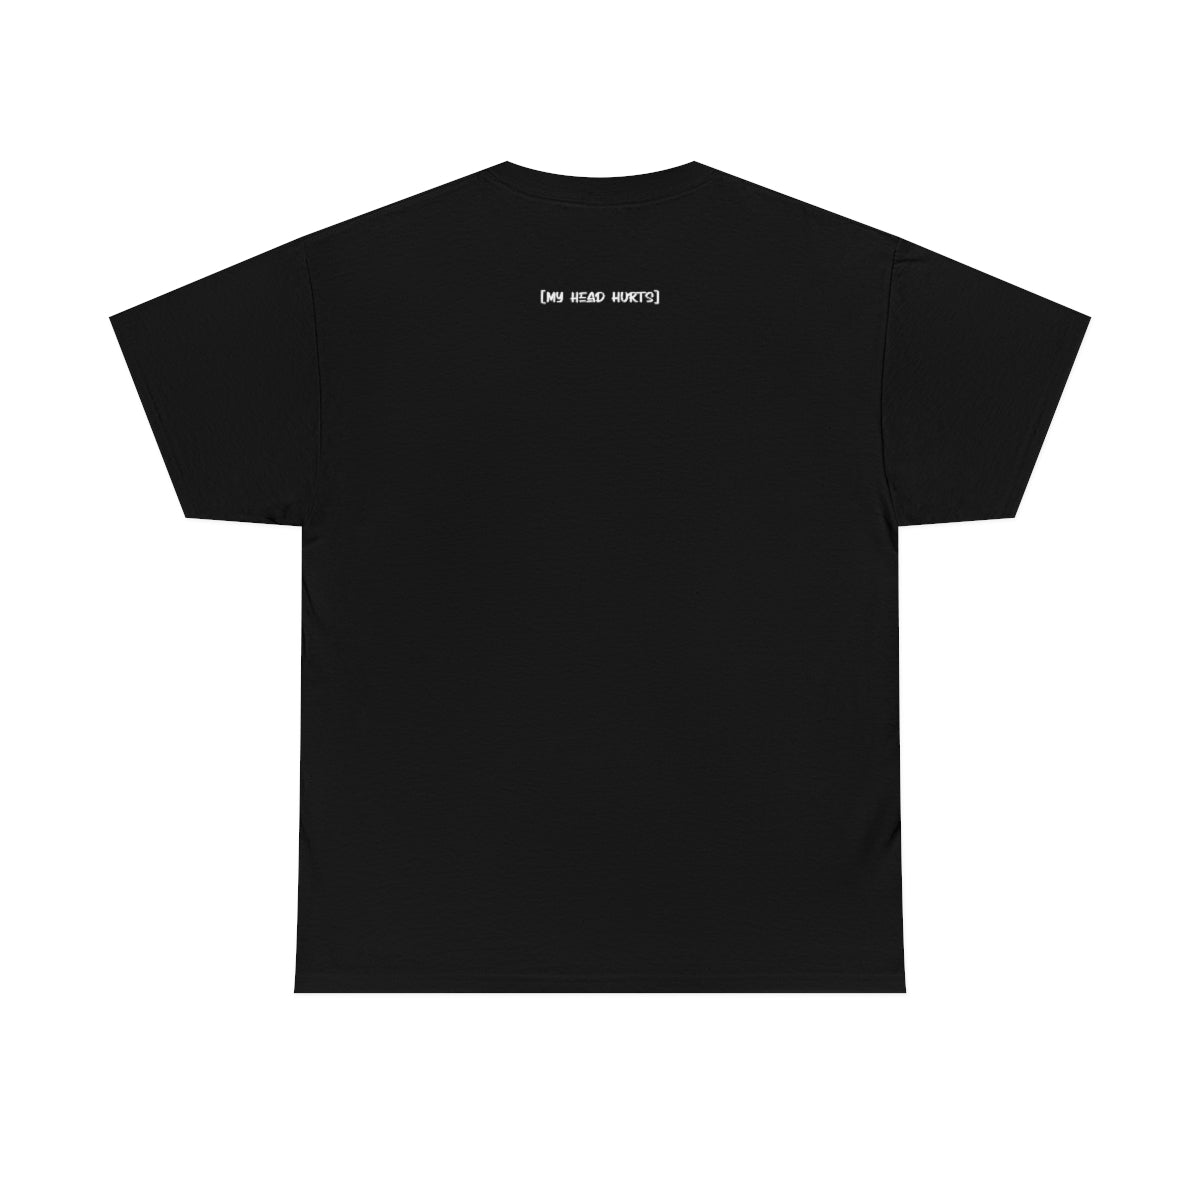 [My head Hurts] Heavy Cotton Between the Lines T-Shirt